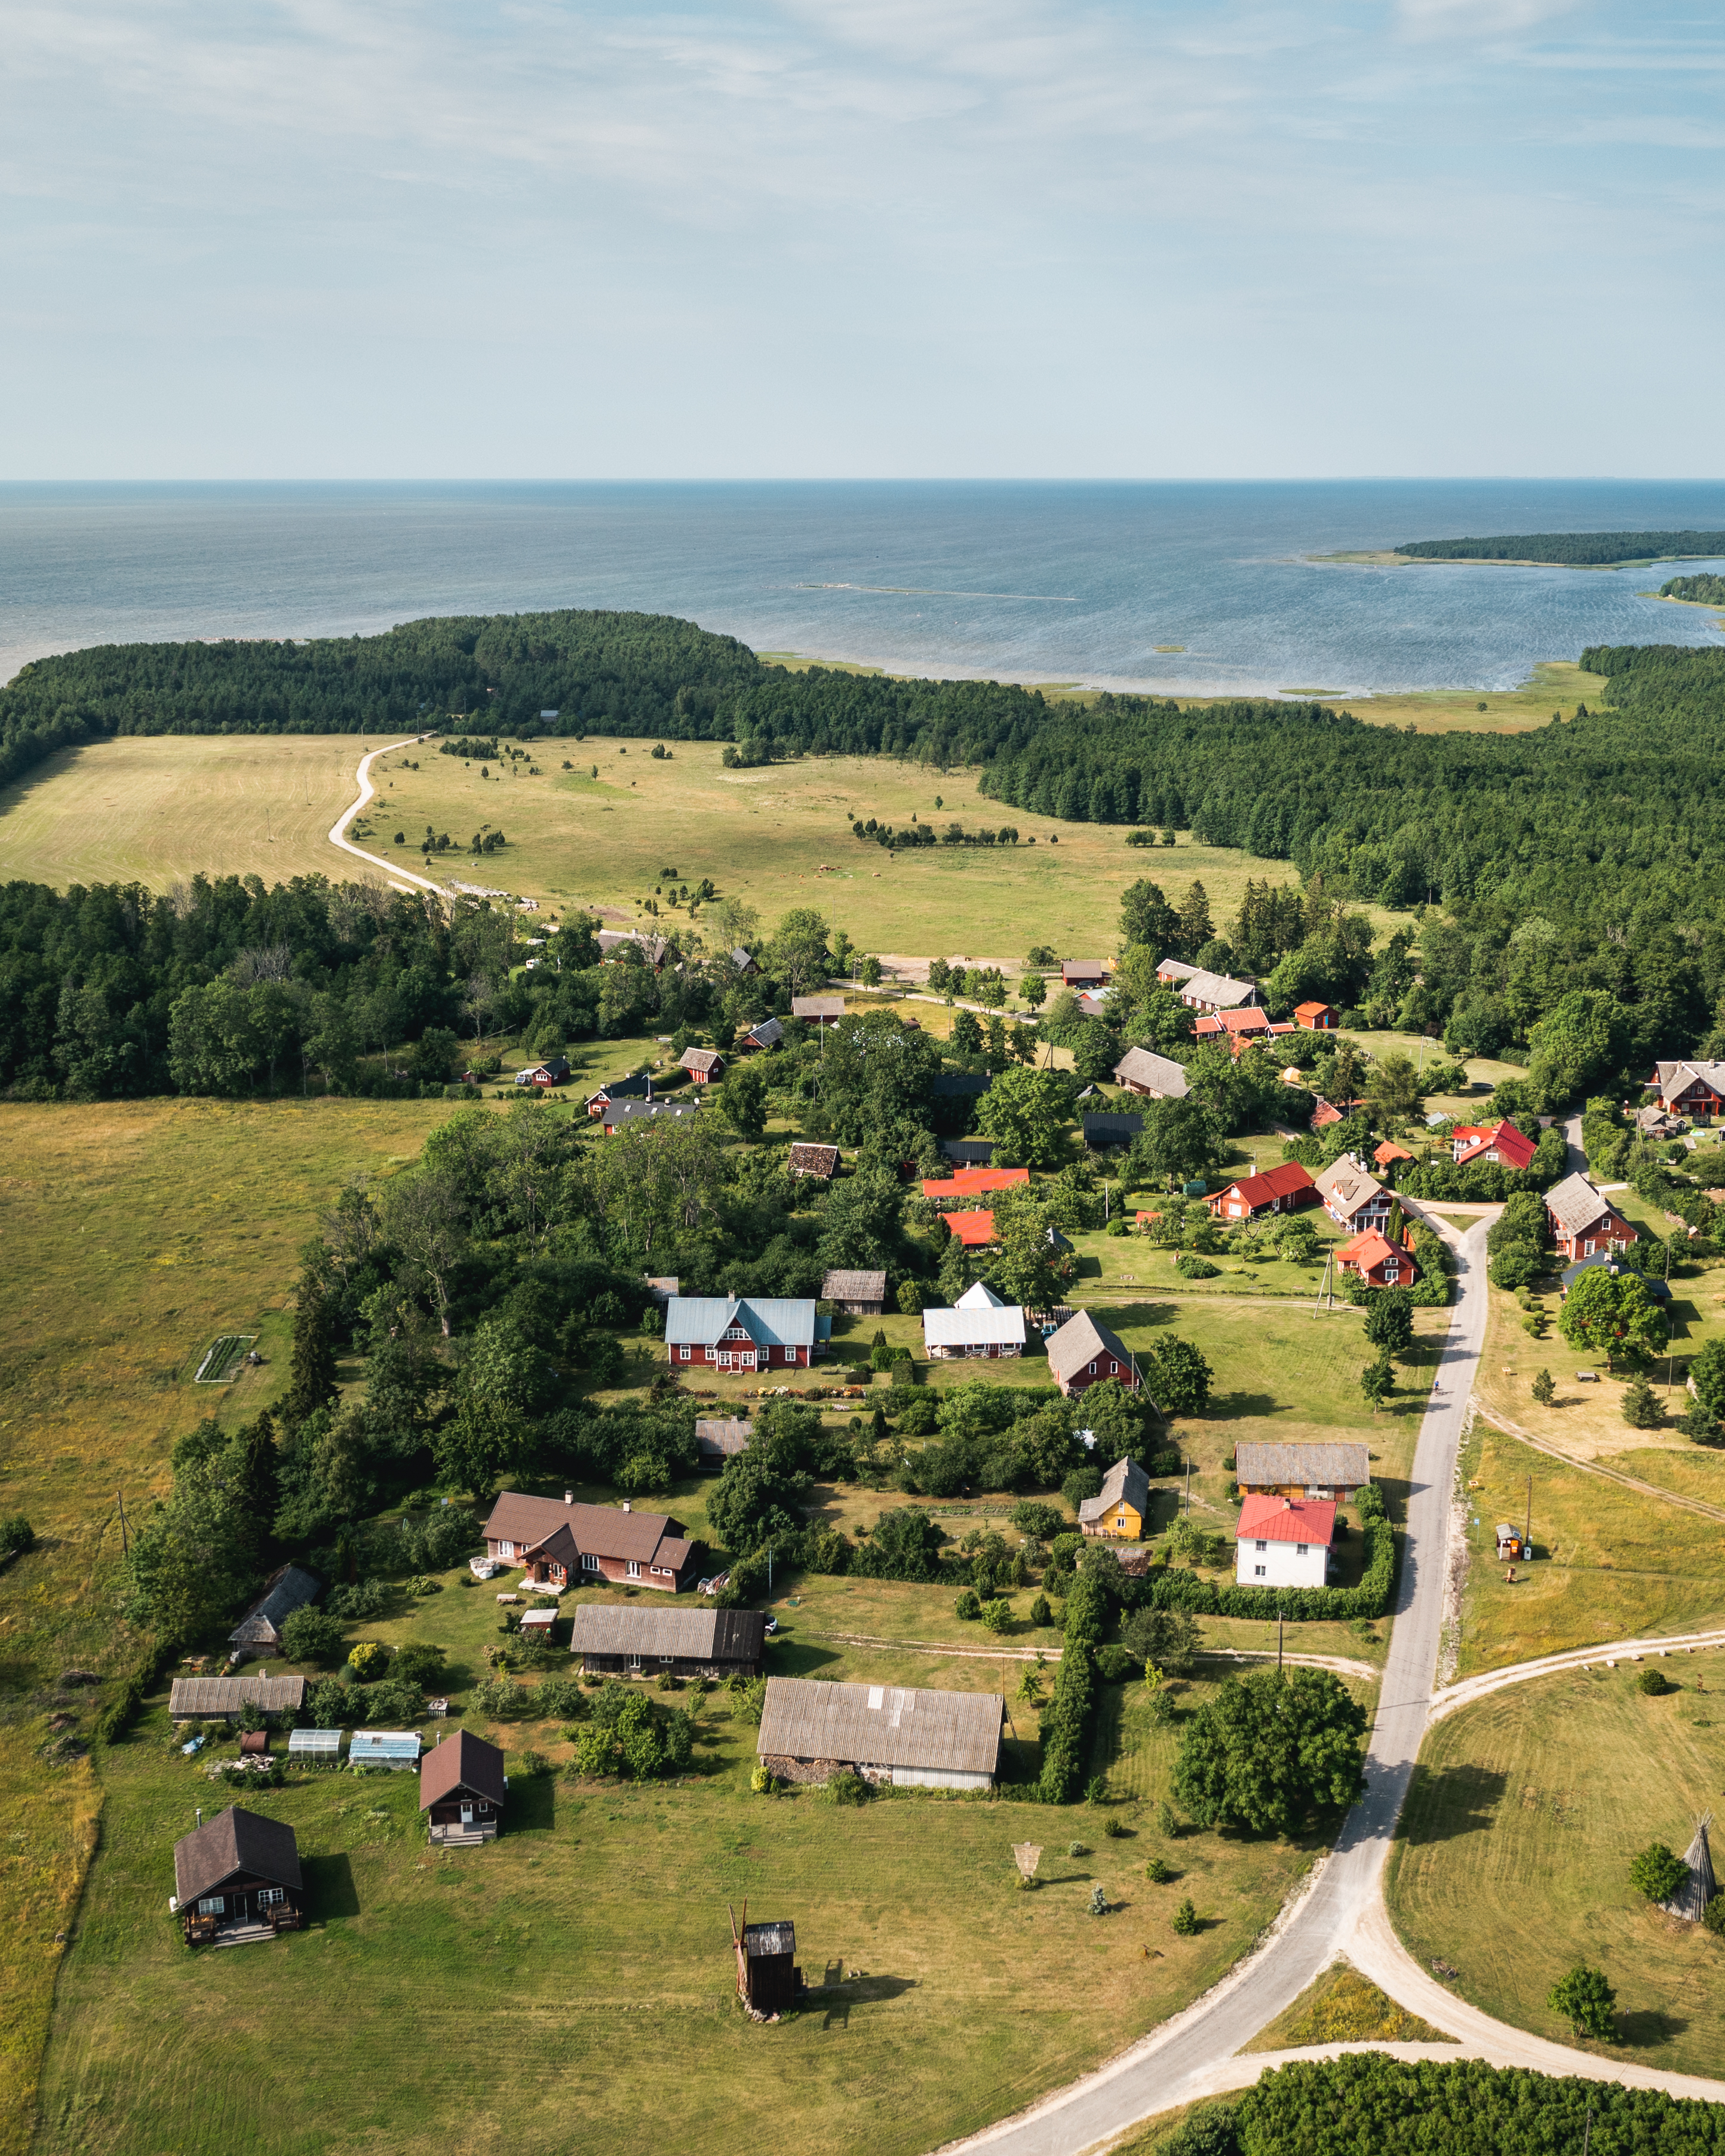 Overview of town Vormsi Island during the summer